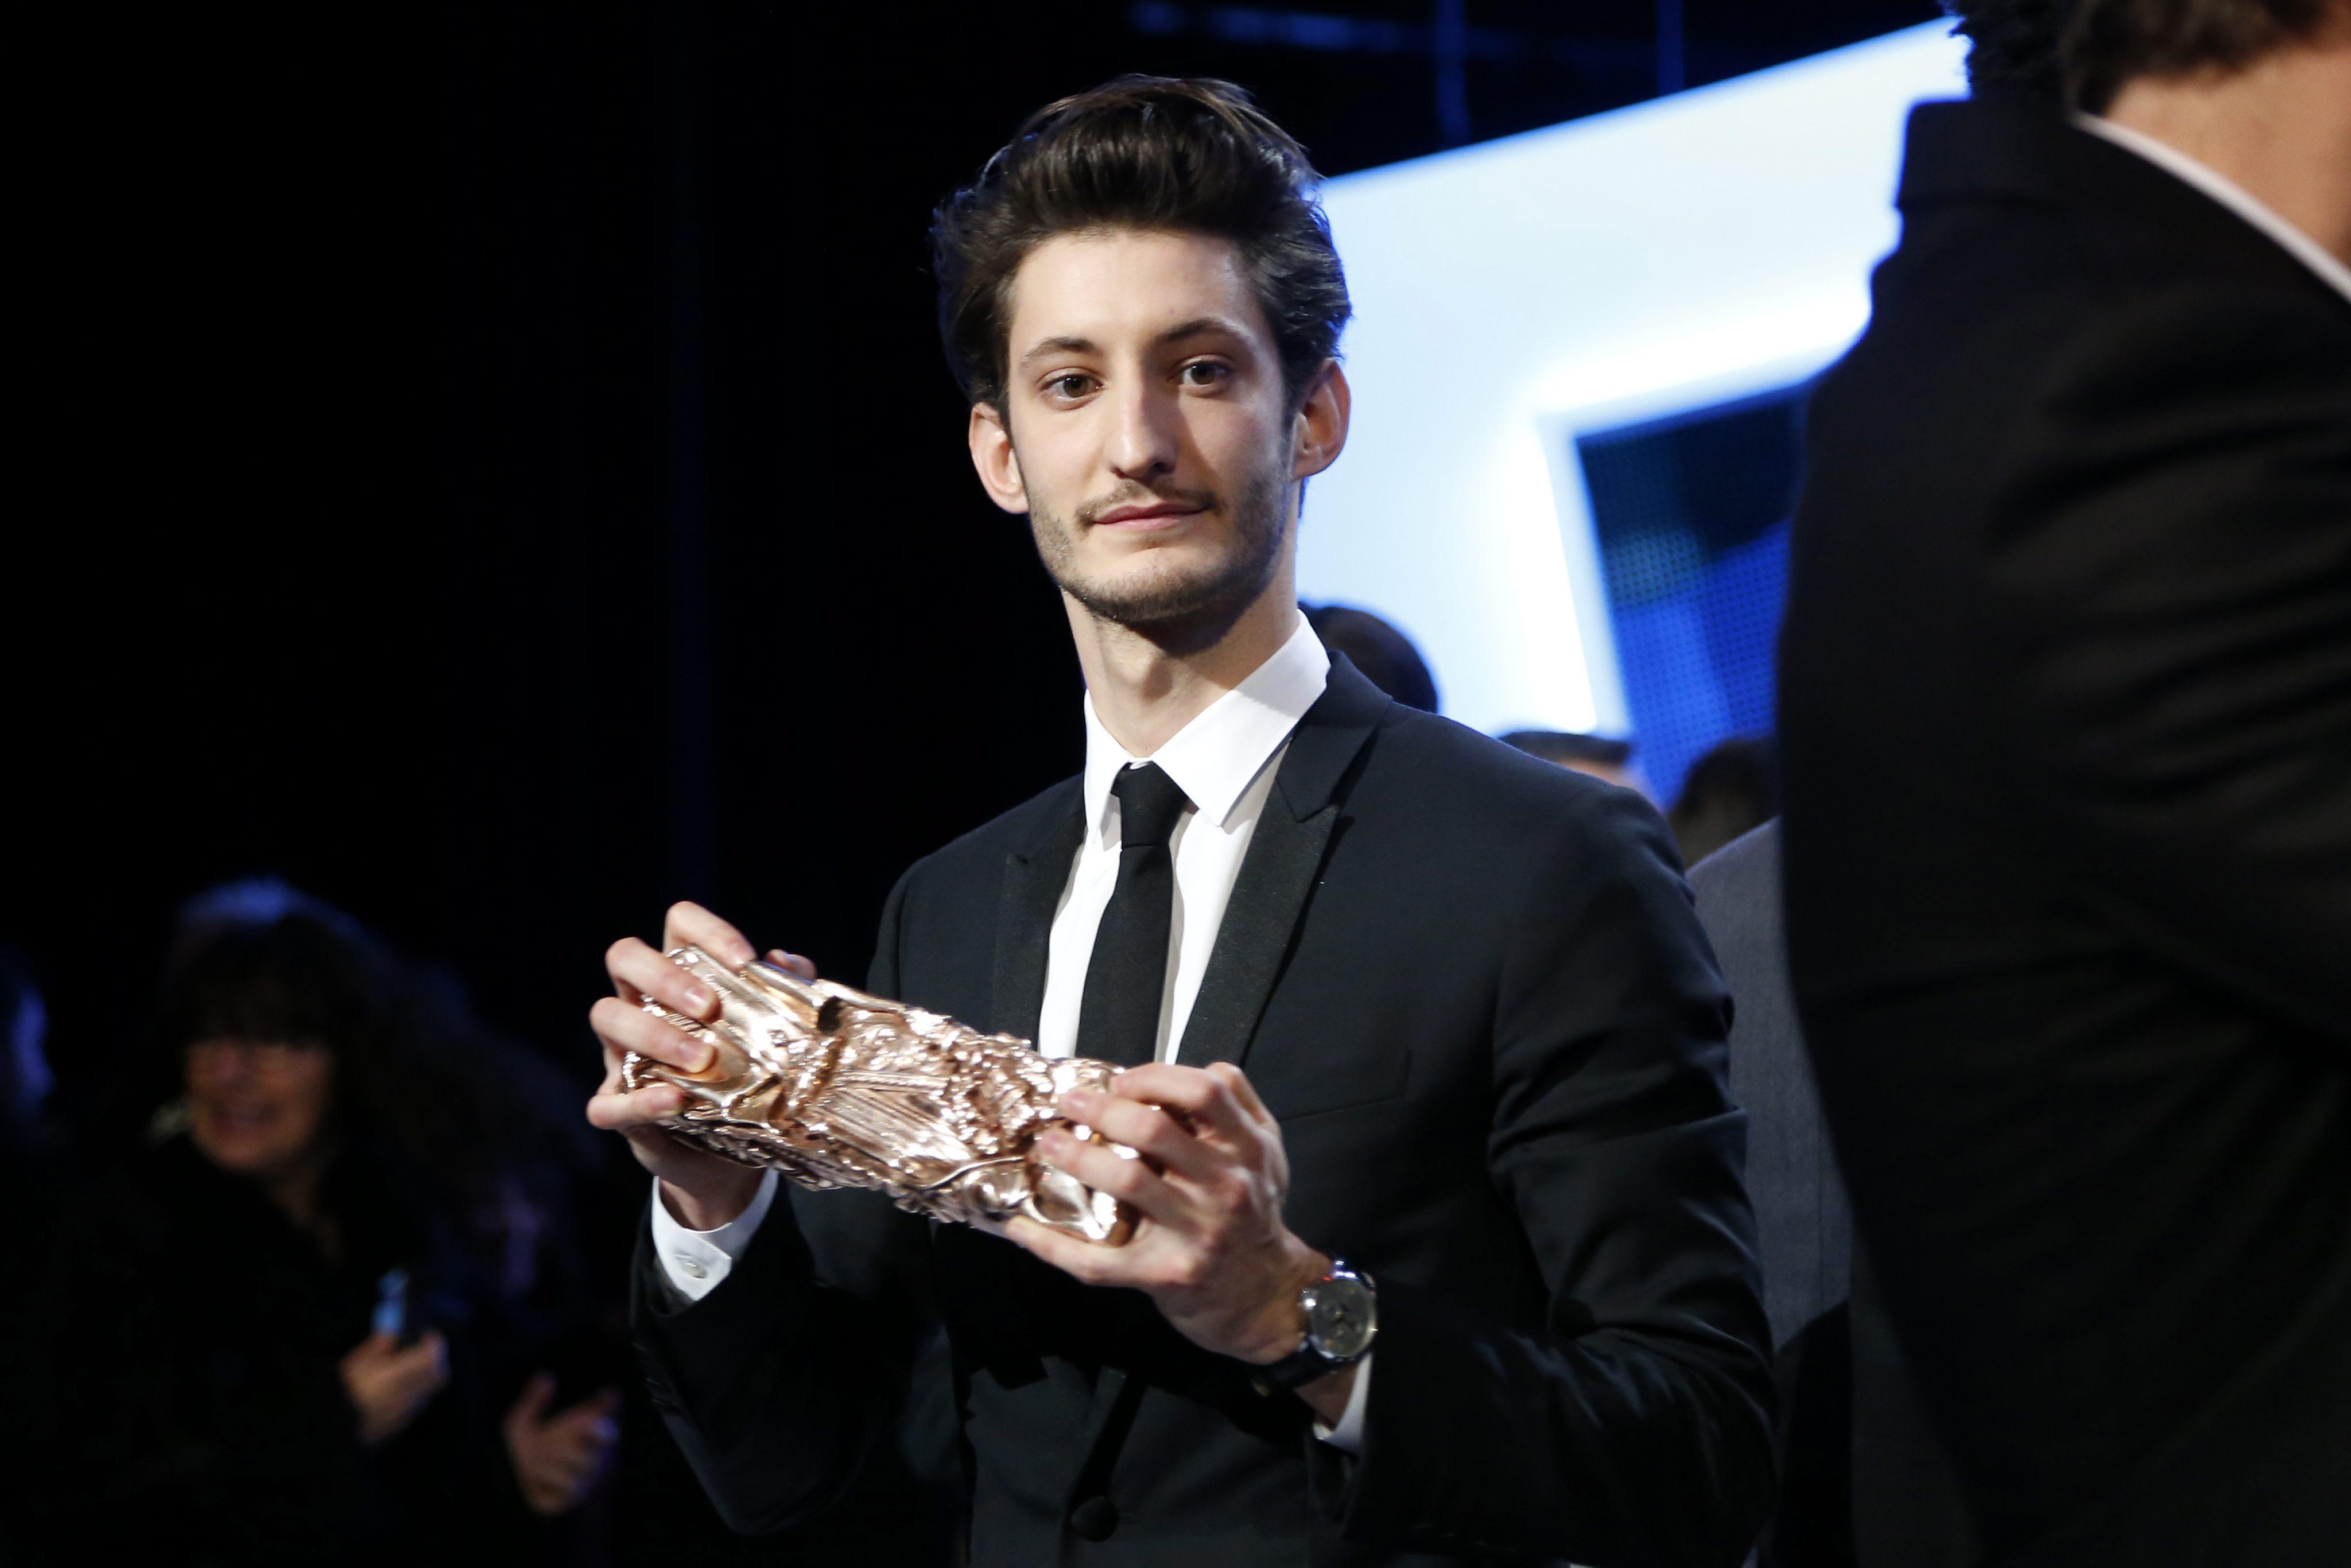 French actor Pierre Niney poses with his award after the 40th annual Cesar awards ceremony held at the Chatelet Theatre in Paris